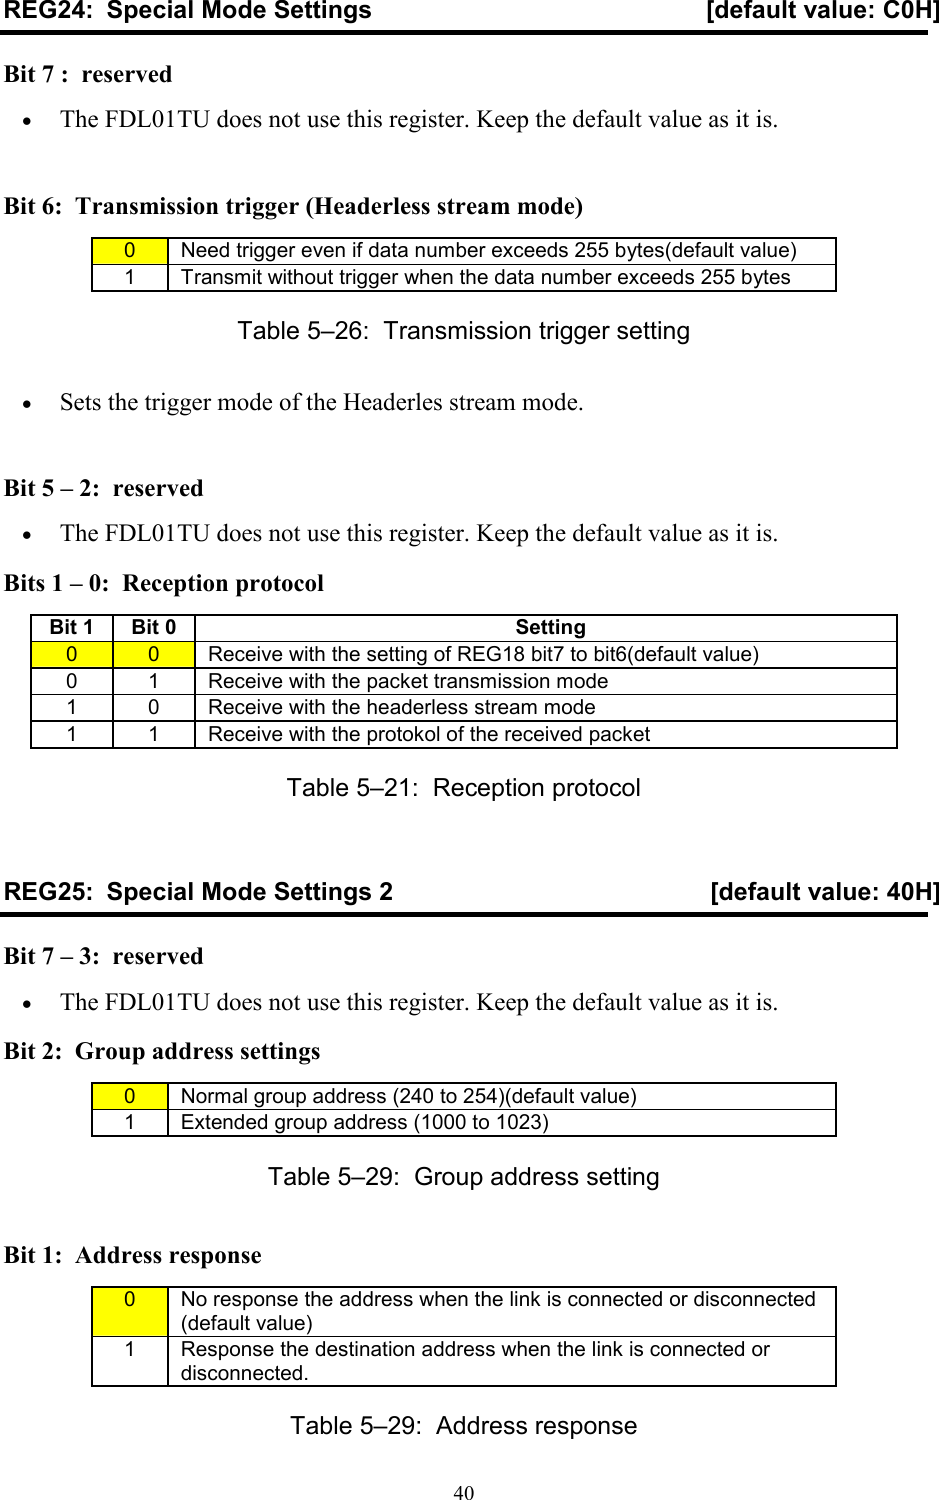   40REG24:  Special Mode Settings  [default value: C0H] Bit 7 :  reserved • The FDL01TU does not use this register. Keep the default value as it is.  Bit 6:  Transmission trigger (Headerless stream mode) 0  Need trigger even if data number exceeds 255 bytes(default value) 1  Transmit without trigger when the data number exceeds 255 bytes Table 5–26:  Transmission trigger setting  • Sets the trigger mode of the Headerles stream mode.  Bit 5 – 2:  reserved • The FDL01TU does not use this register. Keep the default value as it is. Bits 1 – 0:  Reception protocol Bit 1 Bit 0  Setting 0  0  Receive with the setting of REG18 bit7 to bit6(default value) 0  1  Receive with the packet transmission mode 1  0  Receive with the headerless stream mode 1  1  Receive with the protokol of the received packet Table 5–21:  Reception protocol REG25:  Special Mode Settings 2  [default value: 40H] Bit 7 – 3:  reserved • The FDL01TU does not use this register. Keep the default value as it is. Bit 2:  Group address settings 0  Normal group address (240 to 254)(default value) 1  Extended group address (1000 to 1023) Table 5–29:  Group address setting Bit 1:  Address response 0  No response the address when the link is connected or disconnected (default value) 1  Response the destination address when the link is connected or disconnected. Table 5–29:  Address response 